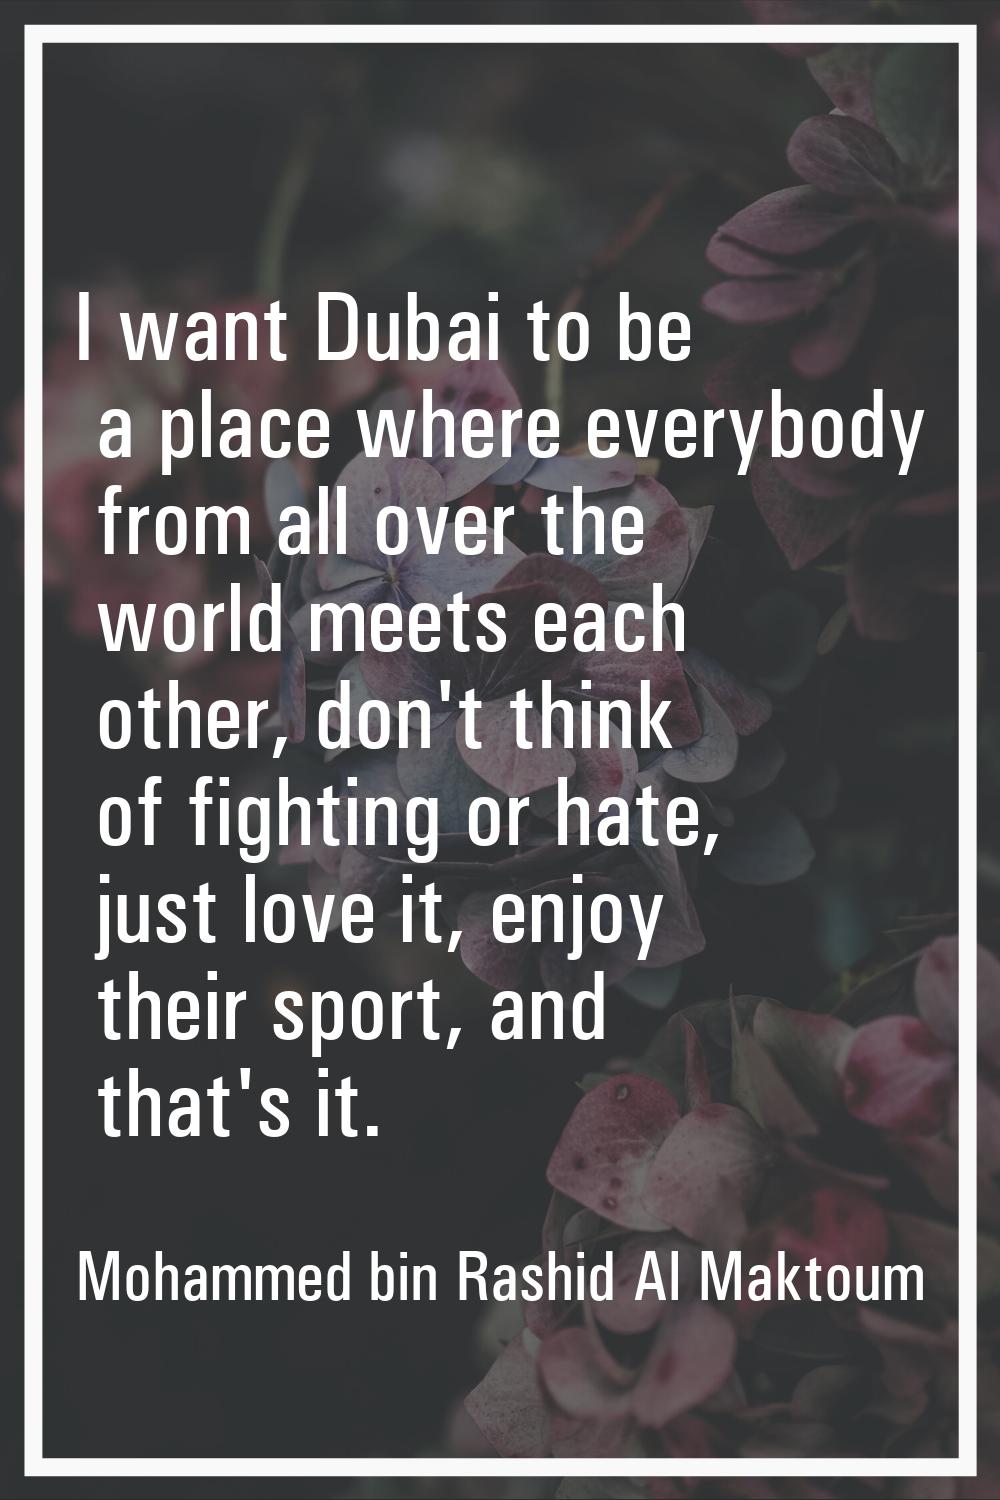 I want Dubai to be a place where everybody from all over the world meets each other, don't think of